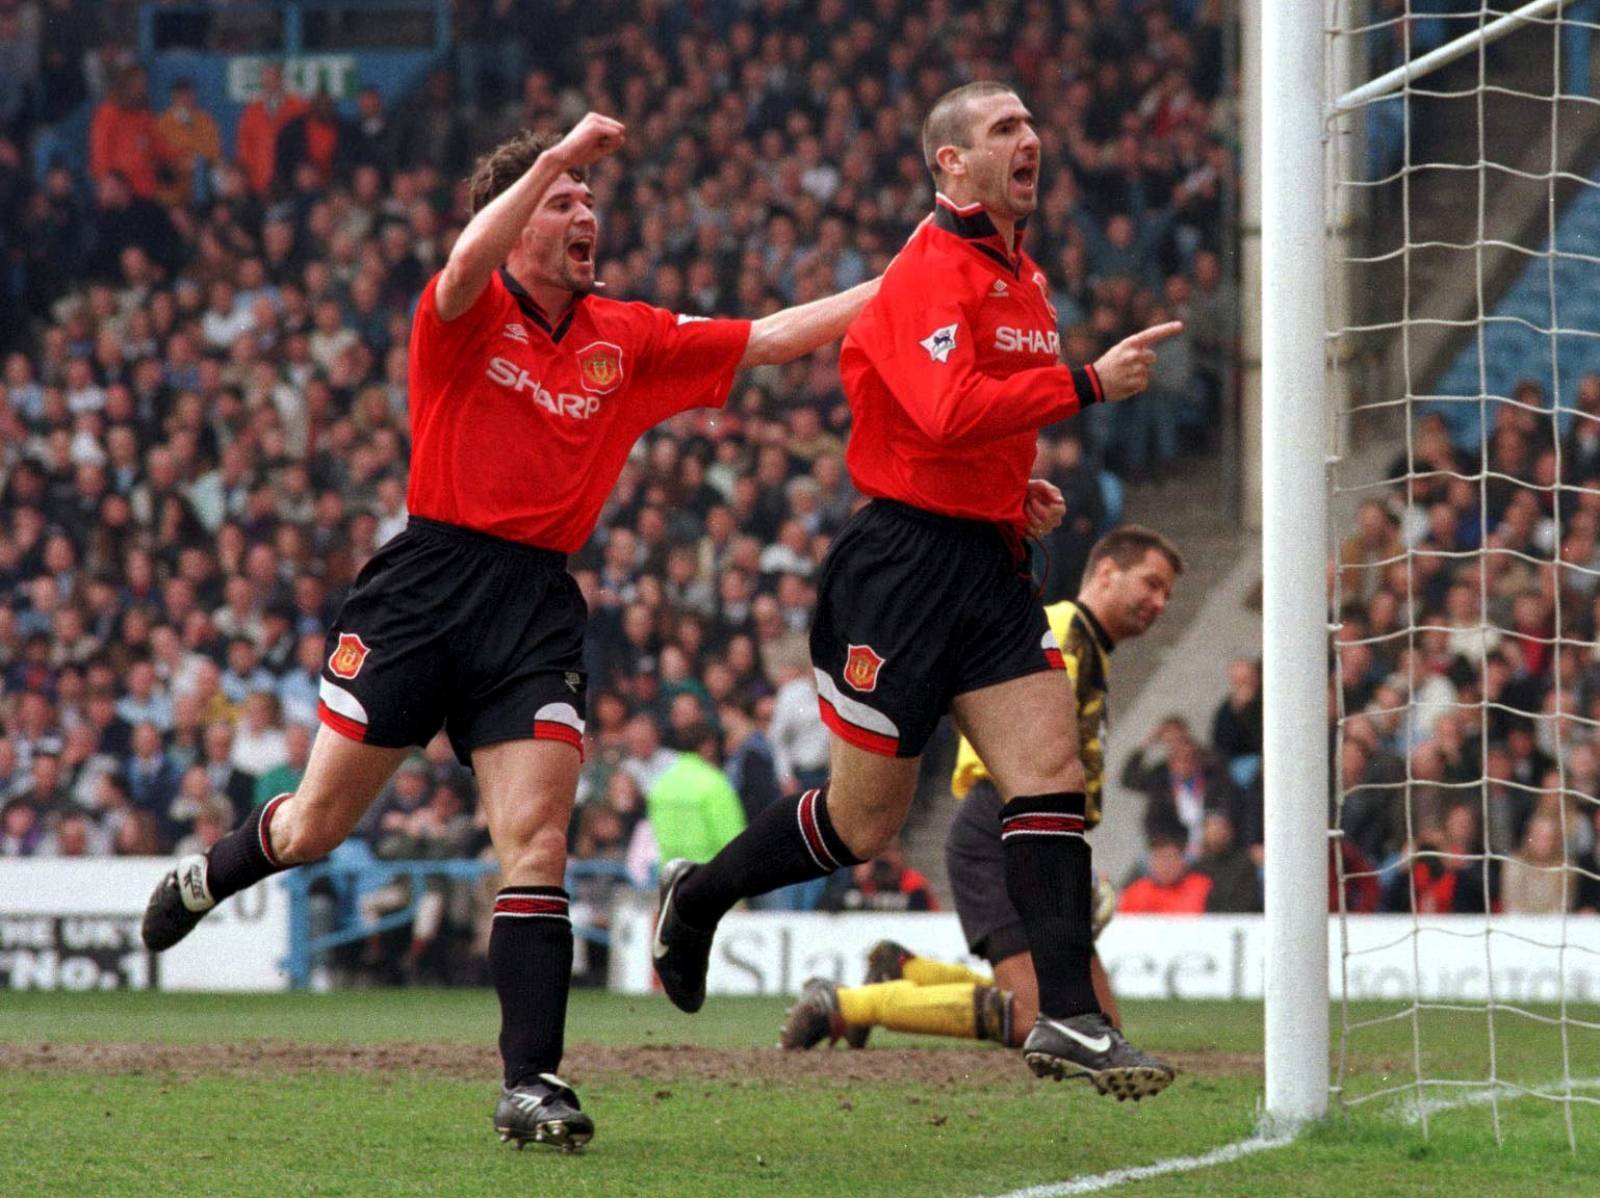 FILE PHOTO: Manchester United's Eric Cantona celebrates after scoring the opening goal from the penalty spot in a 3-2 Premier League win over Manchester City at Maine Road, Manchester.